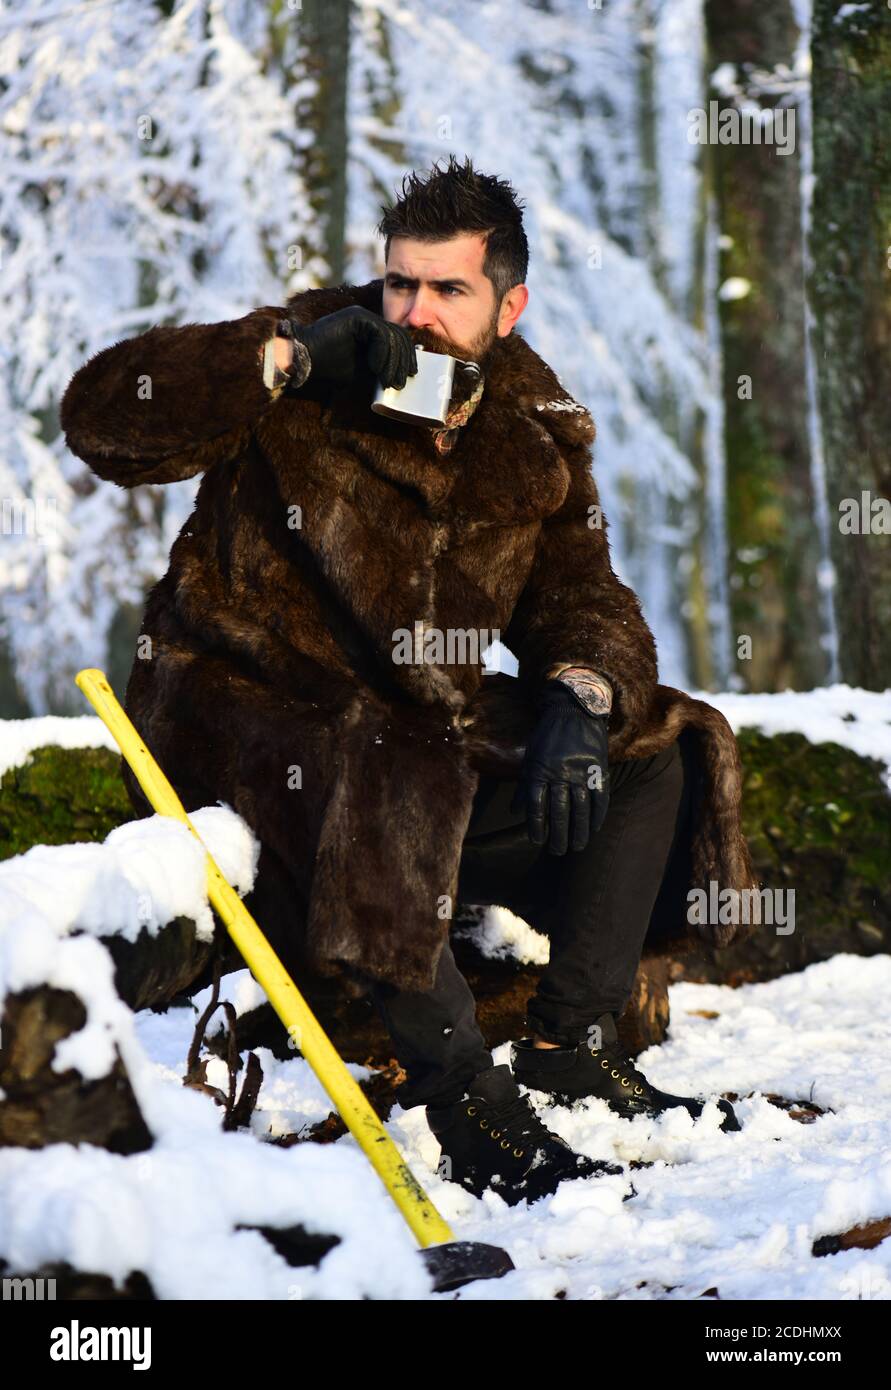 Macho with beard and mustache in forest. Guy on snowy nature park background. Man in fur coat drinks from metal flask near yellow axe. Brutal gamekeeper concept. Stock Photo